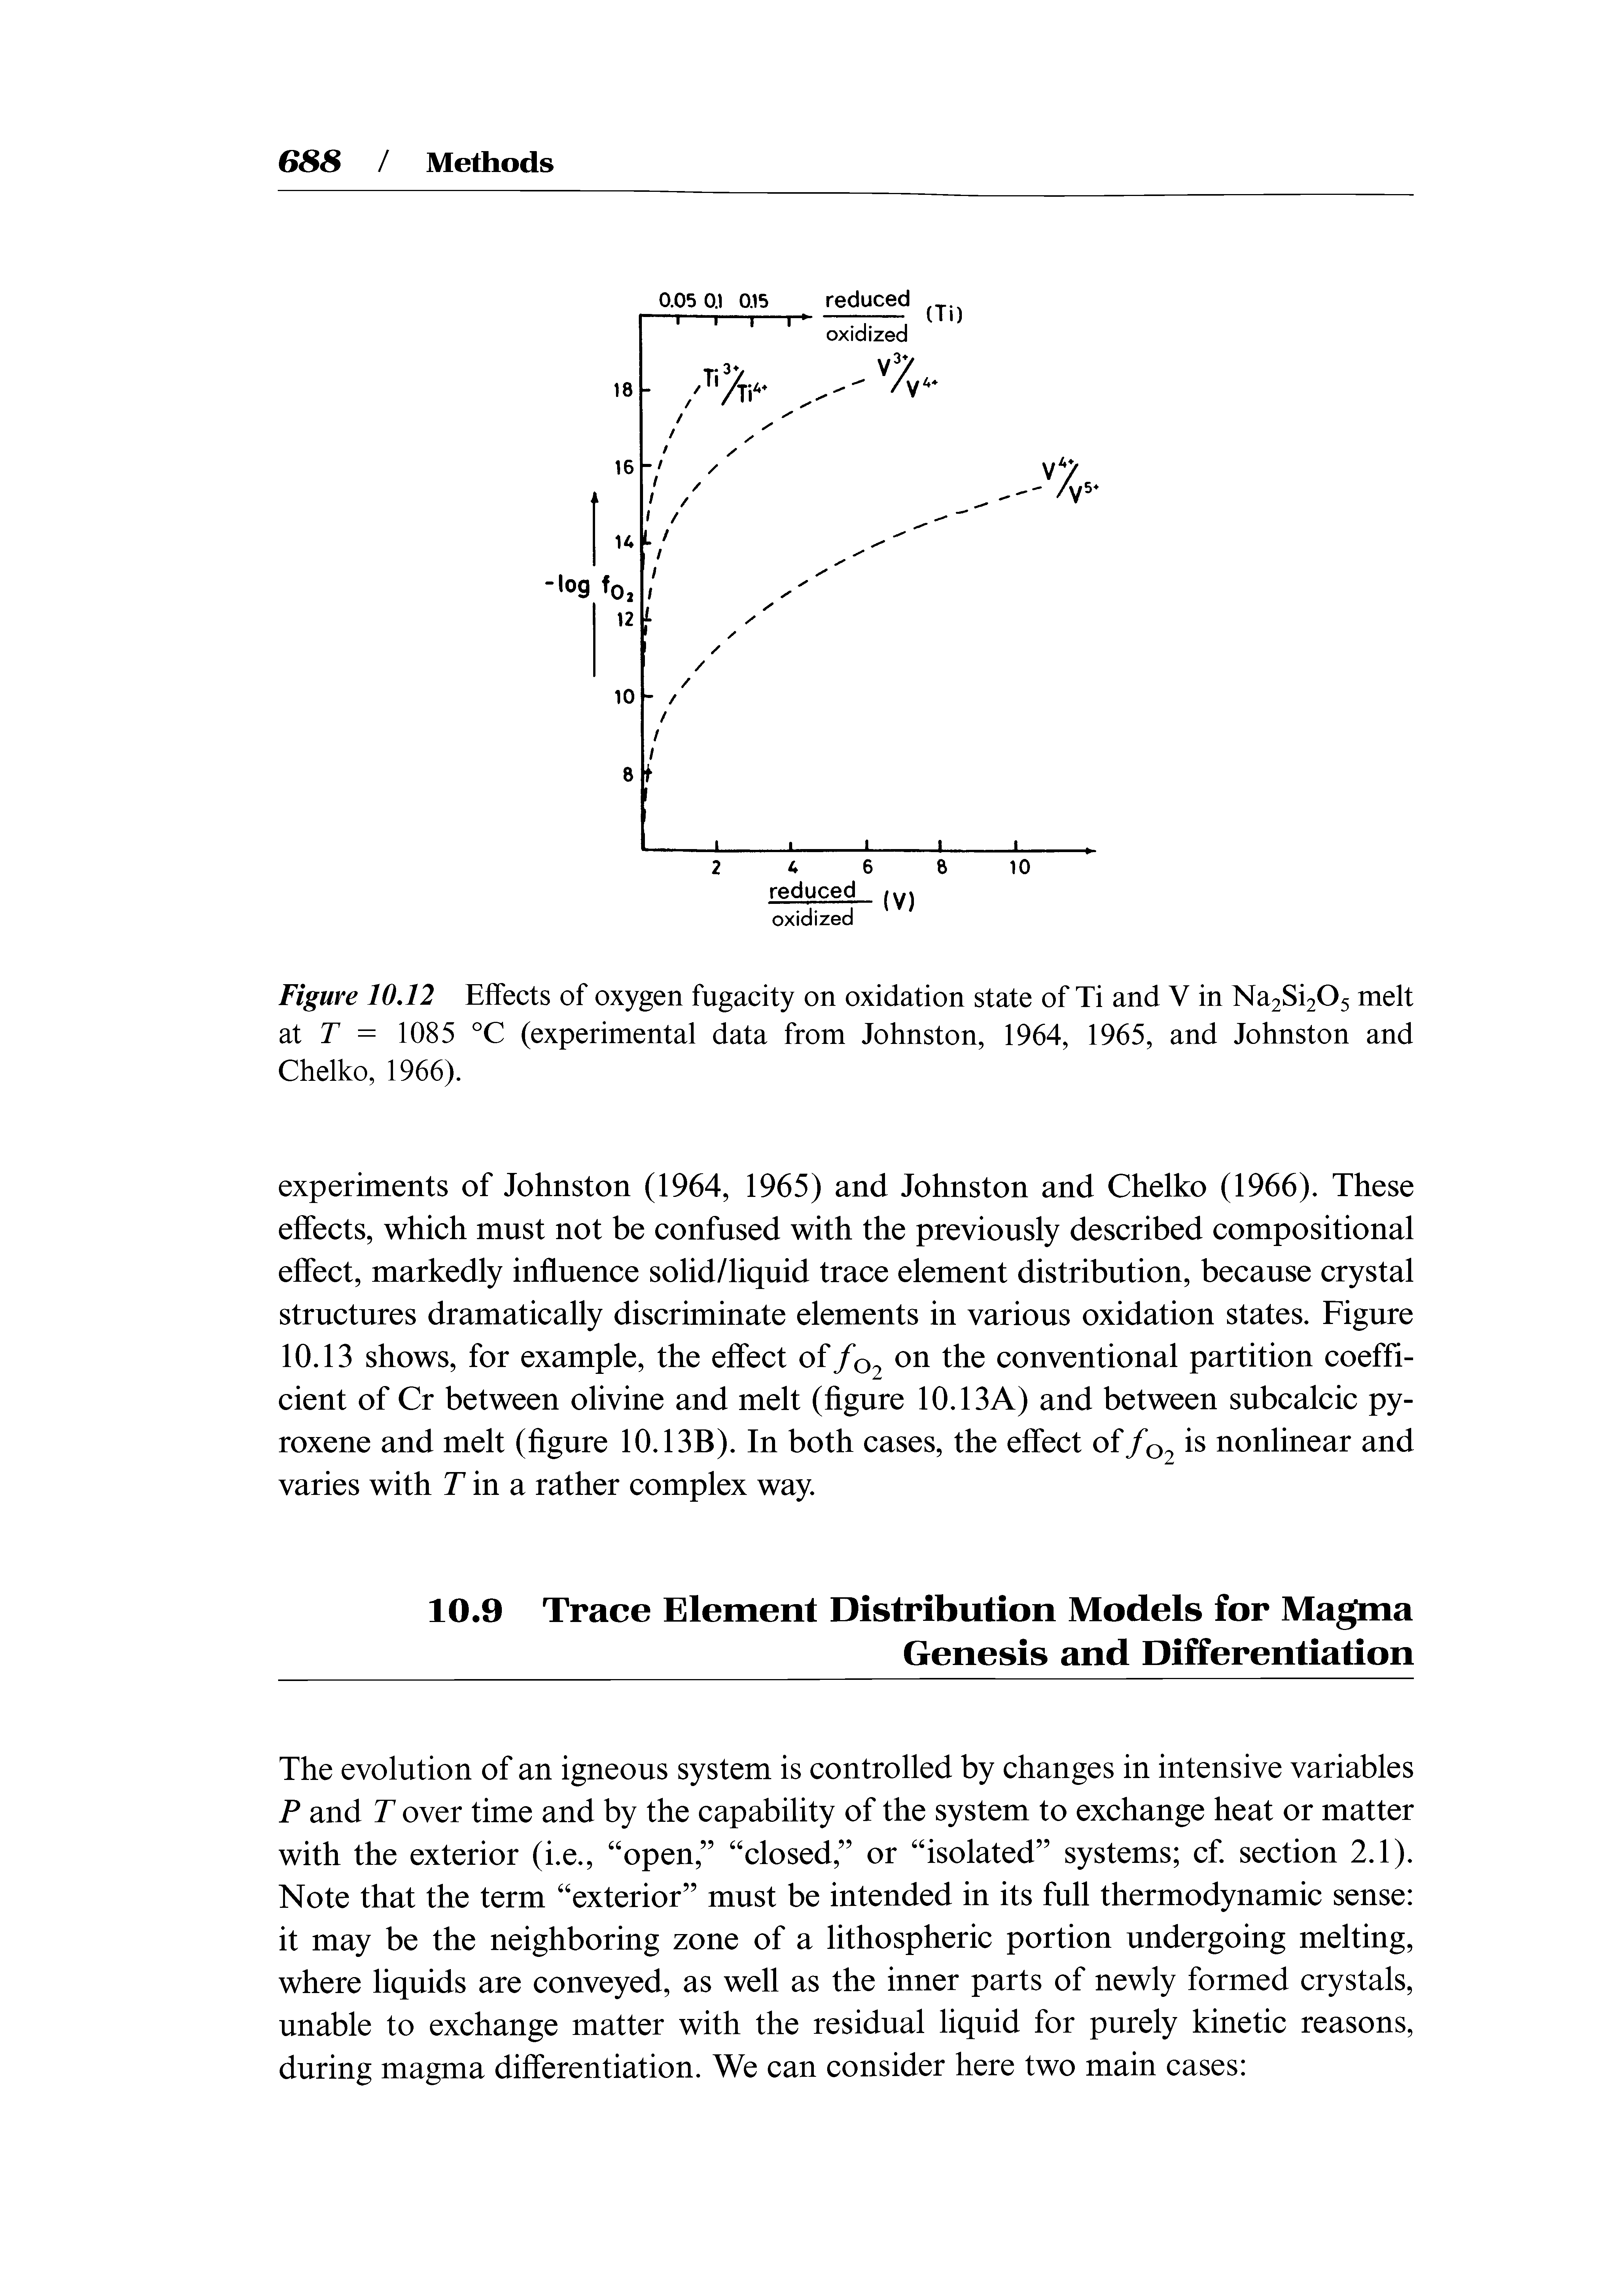 Figure 10,12 Effects of oxygen fugacity on oxidation state of Ti and V in Na2Si205 melt at r = 1085 °C (experimental data from Johnston, 1964, 1965, and Johnston and Chelko, 1966).